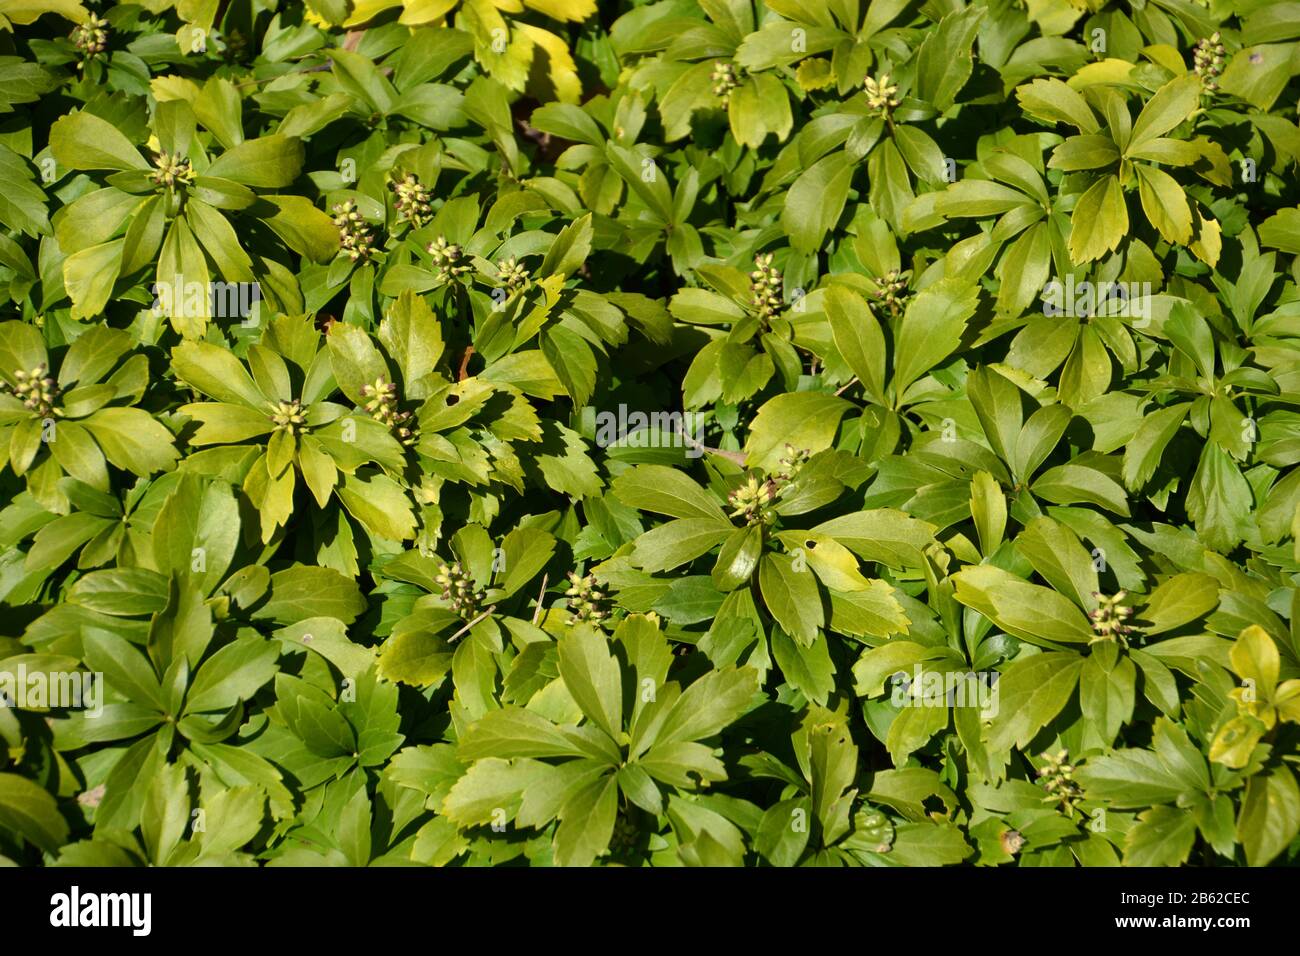 Japanese Pachysandra Evergreen Glossy Leaves Plant Winter Colored Leaves Of Japanese Spurge Shrub Stock Photo Alamy